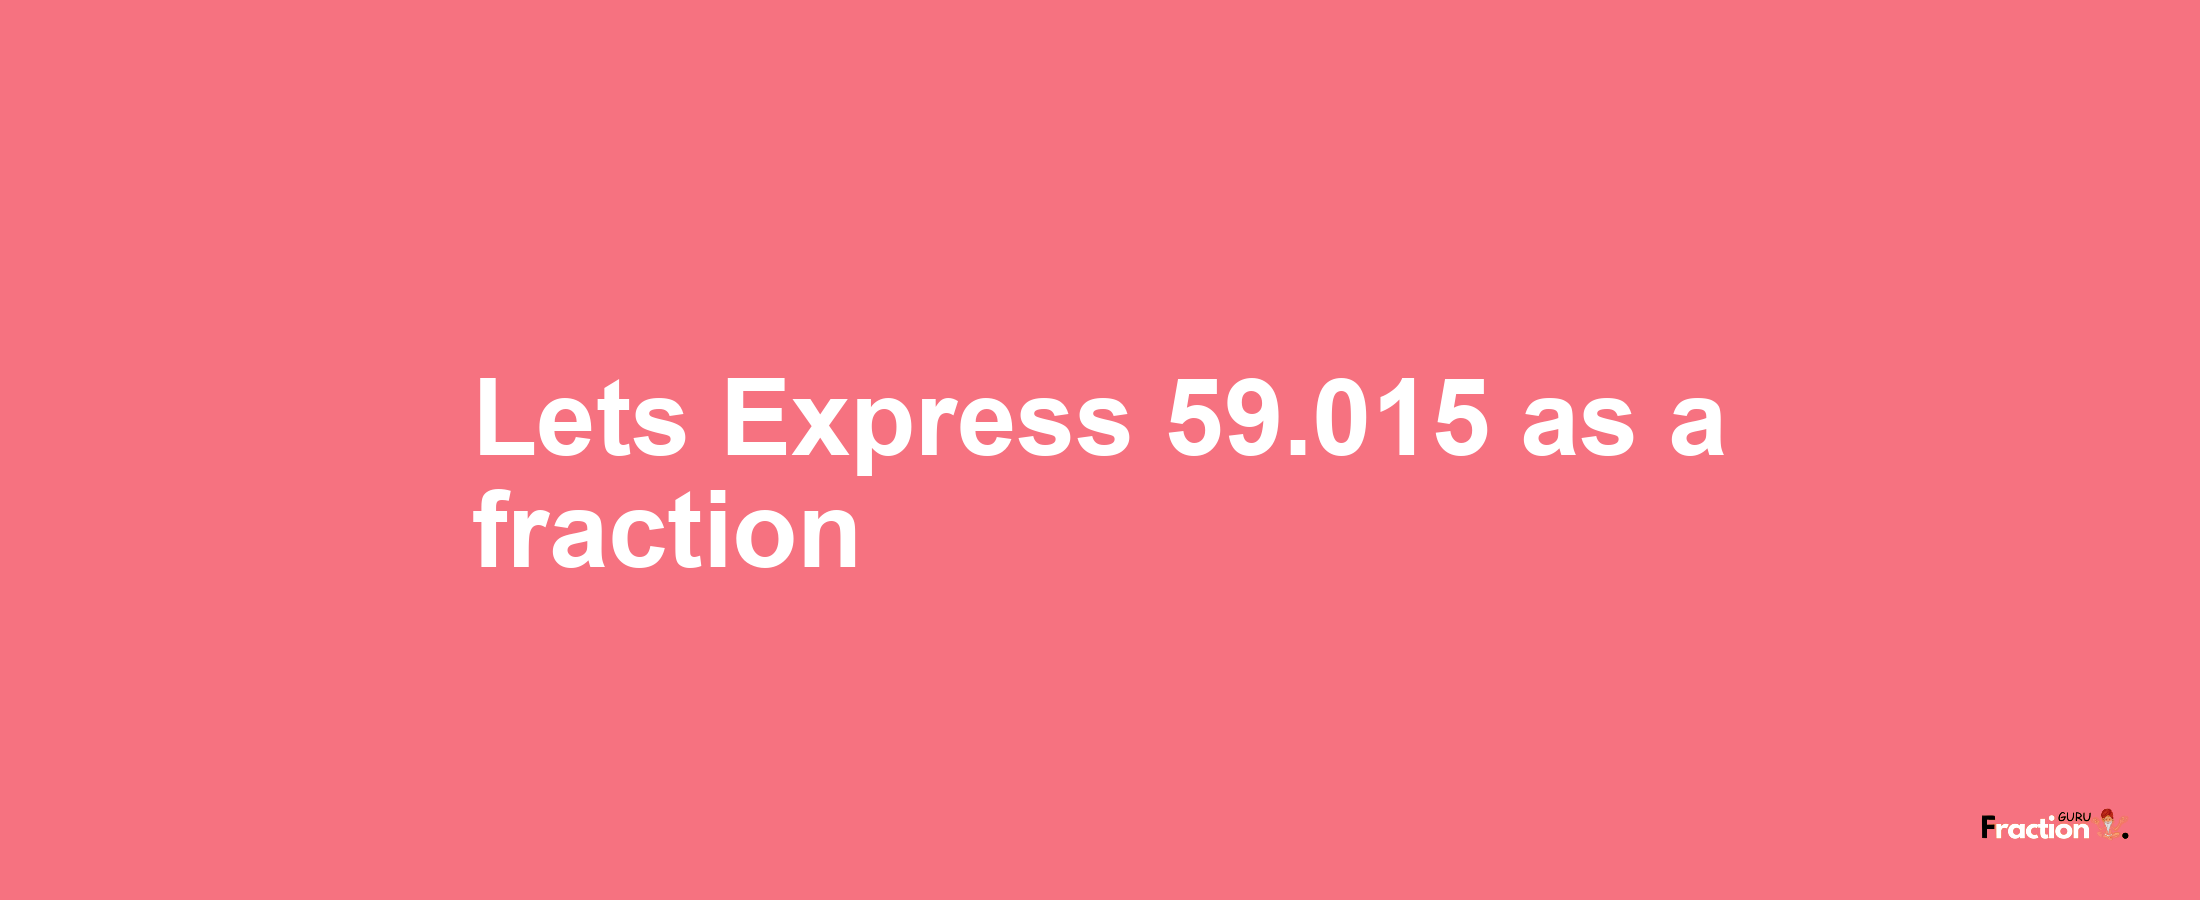 Lets Express 59.015 as afraction